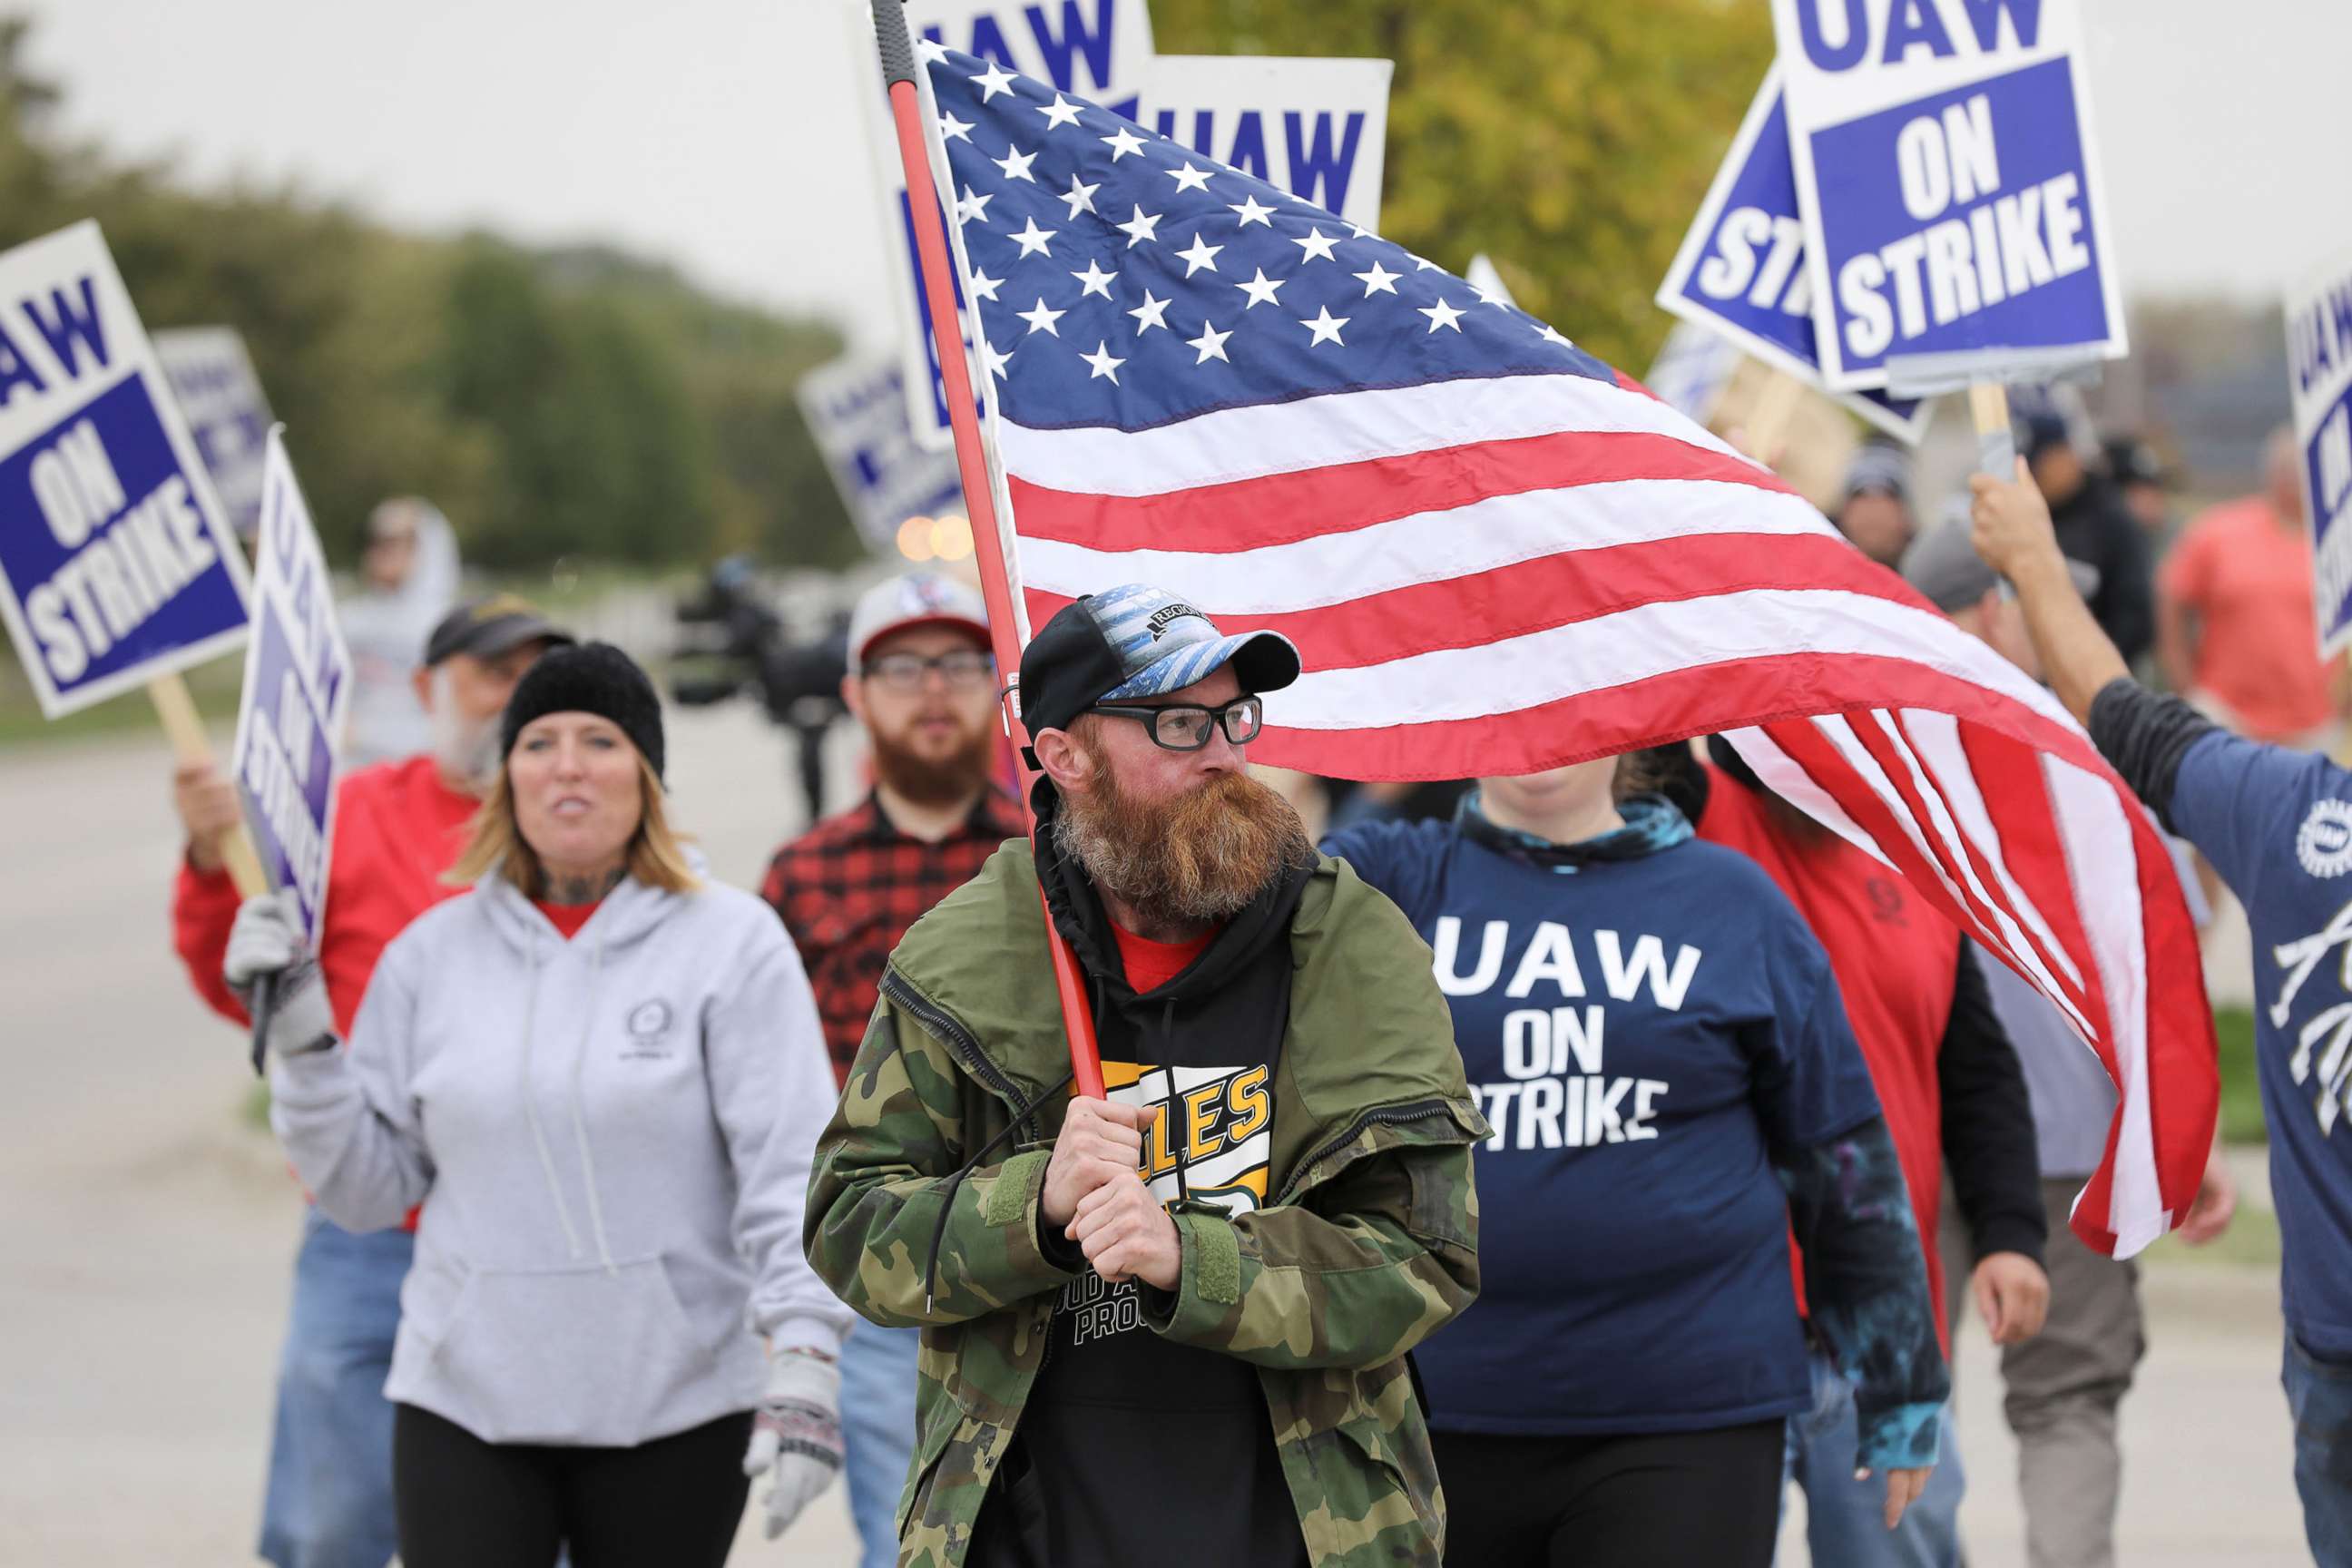 PHOTO: Striking members of the United Auto Workers (UAW) picket at the Deere plant in Ankeny, Iowa, Oct. 20, 2021.